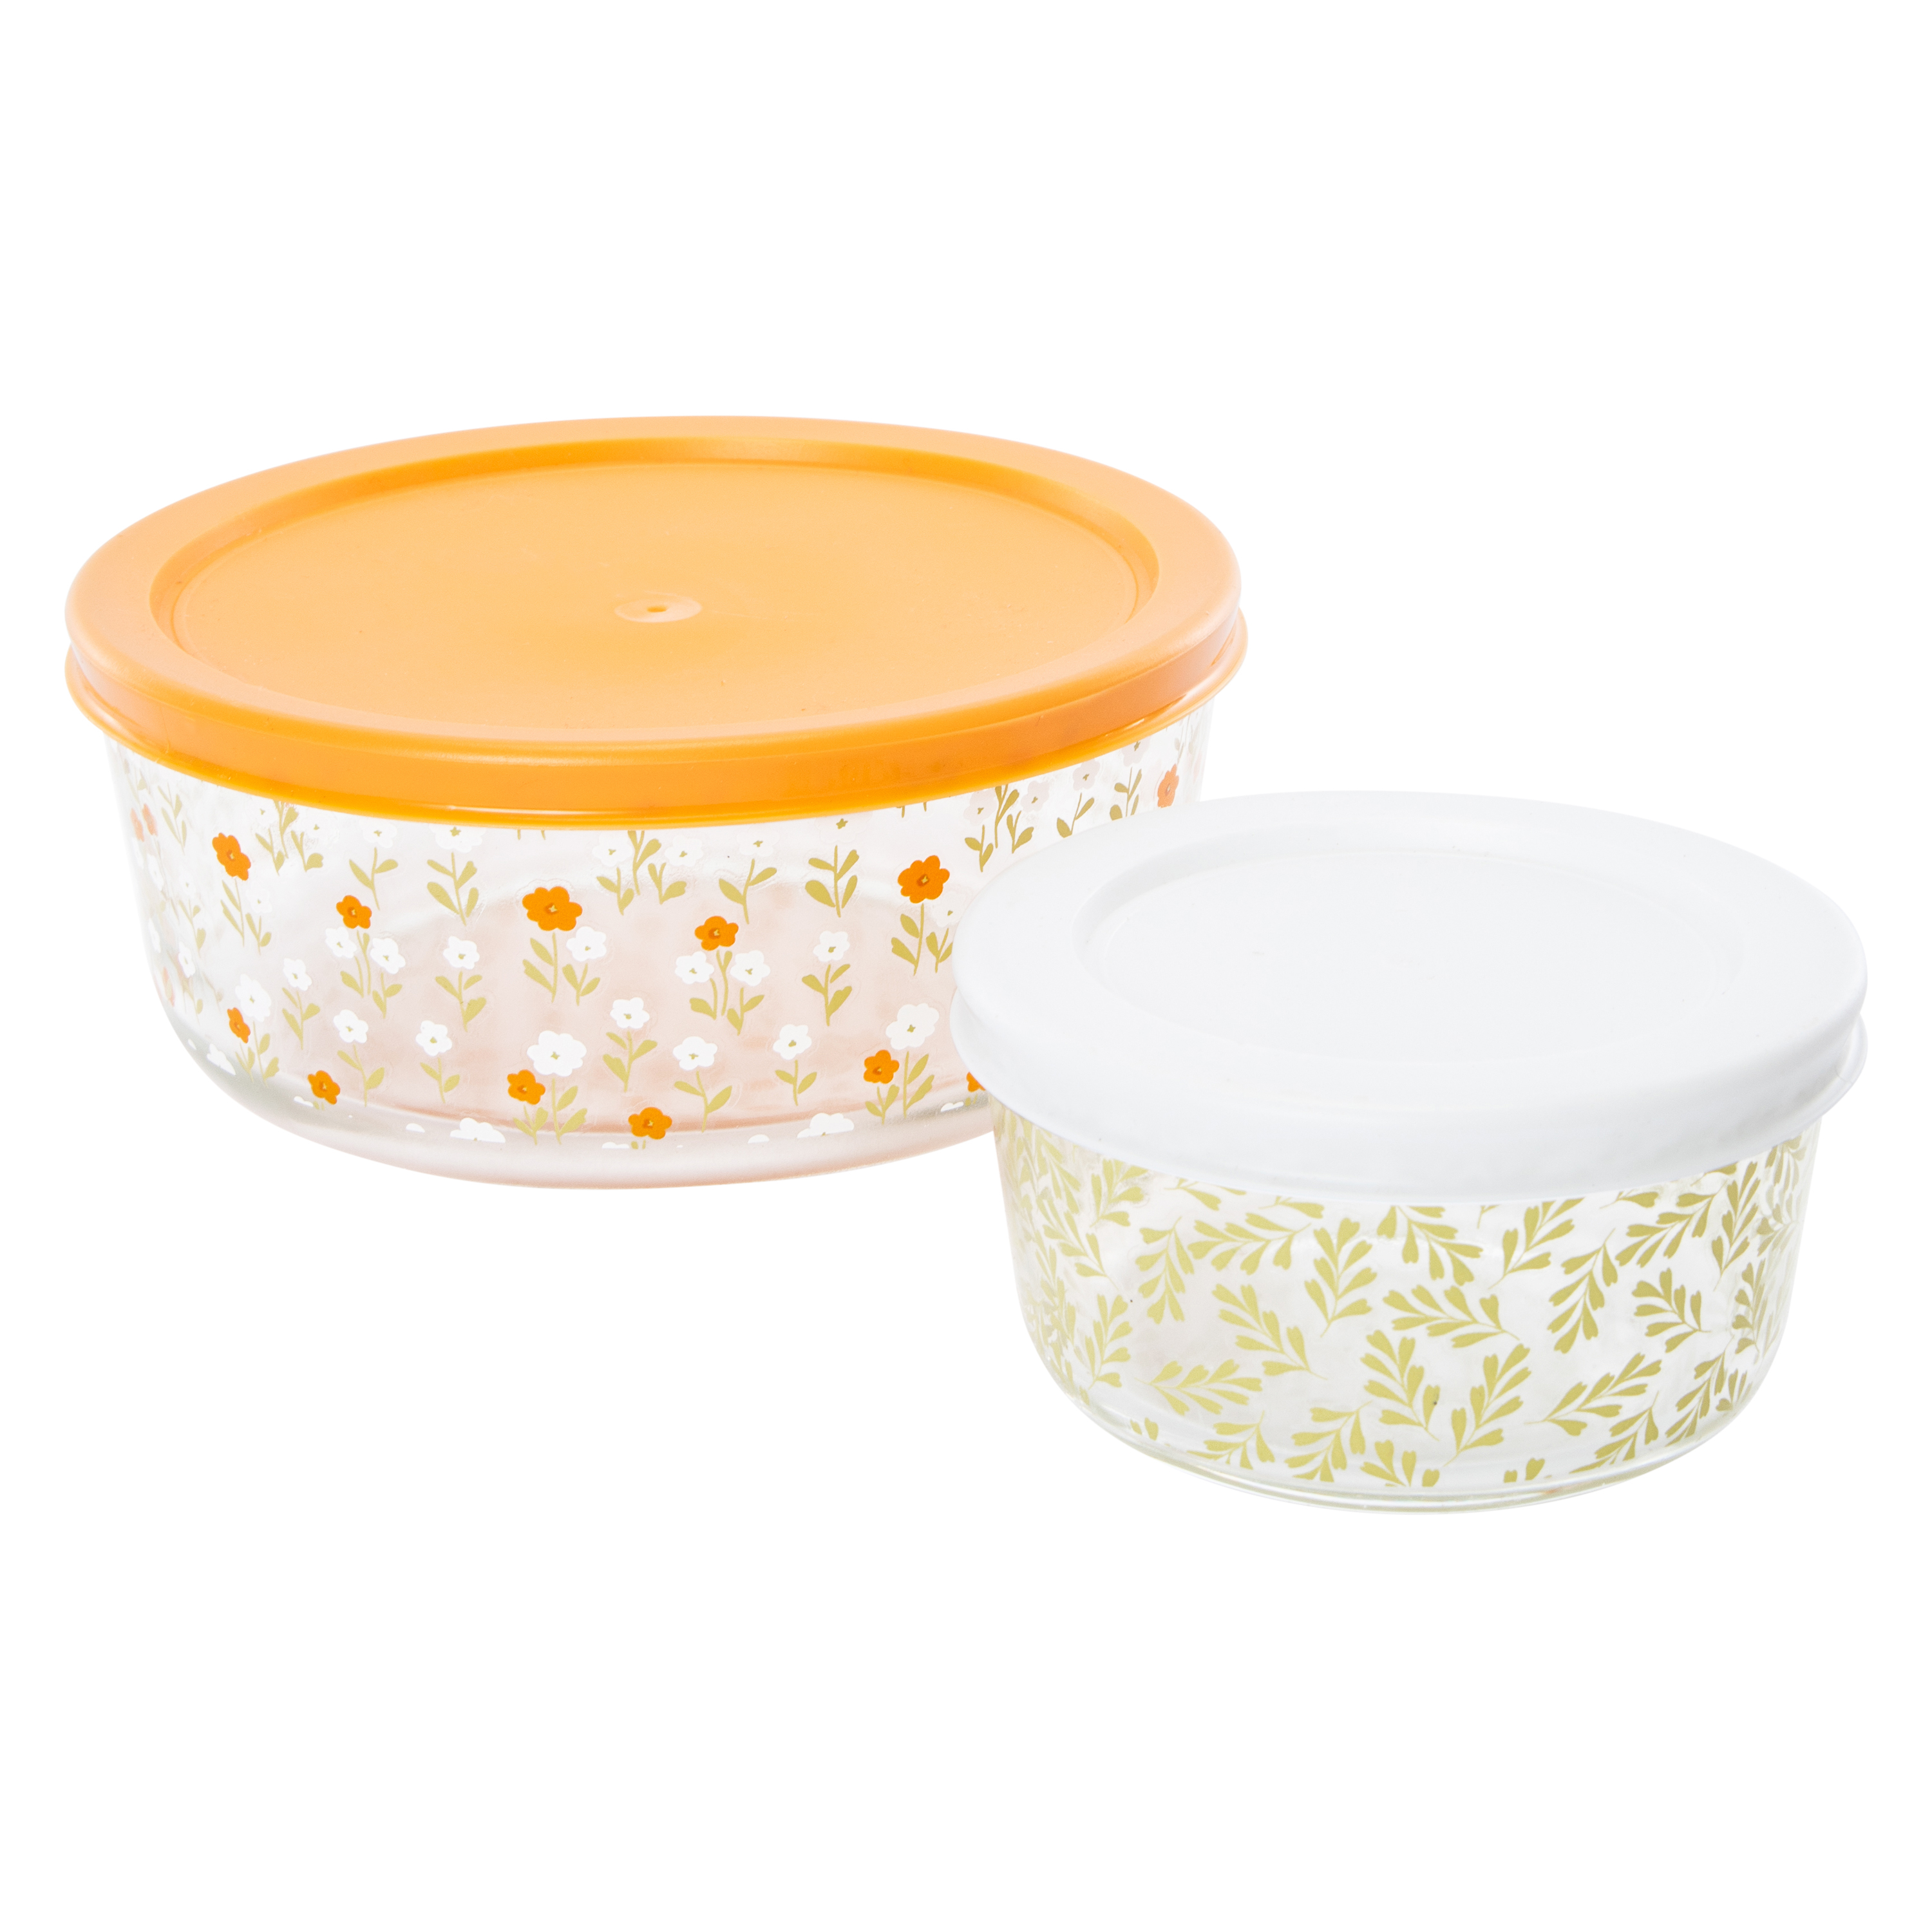 Printed Food Storage Containers Set 2-Count